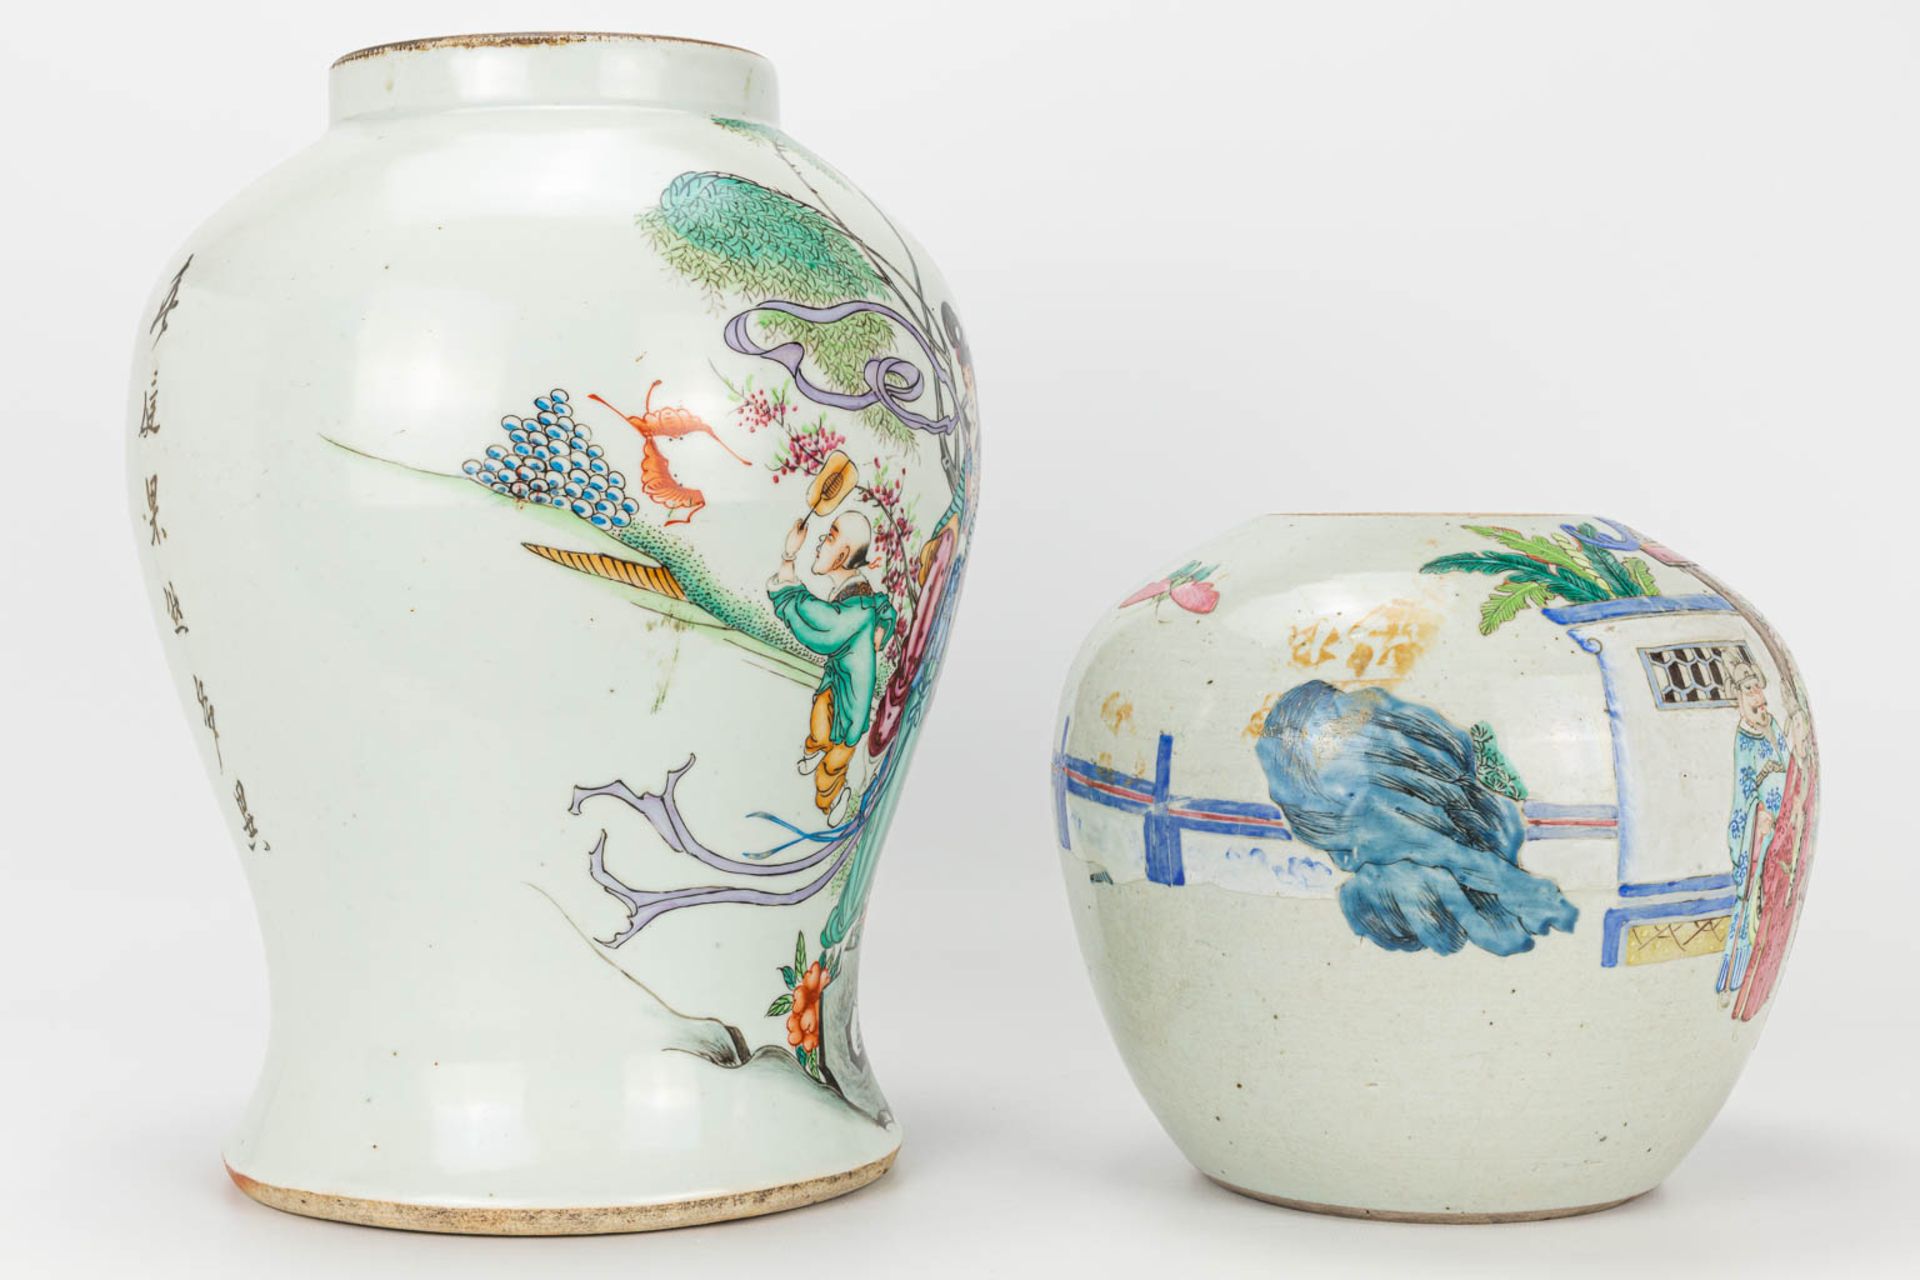 A set of 4 items made of Chinese porcelain. 2 small bowls and 2 ginger jars without lids. - Image 18 of 23